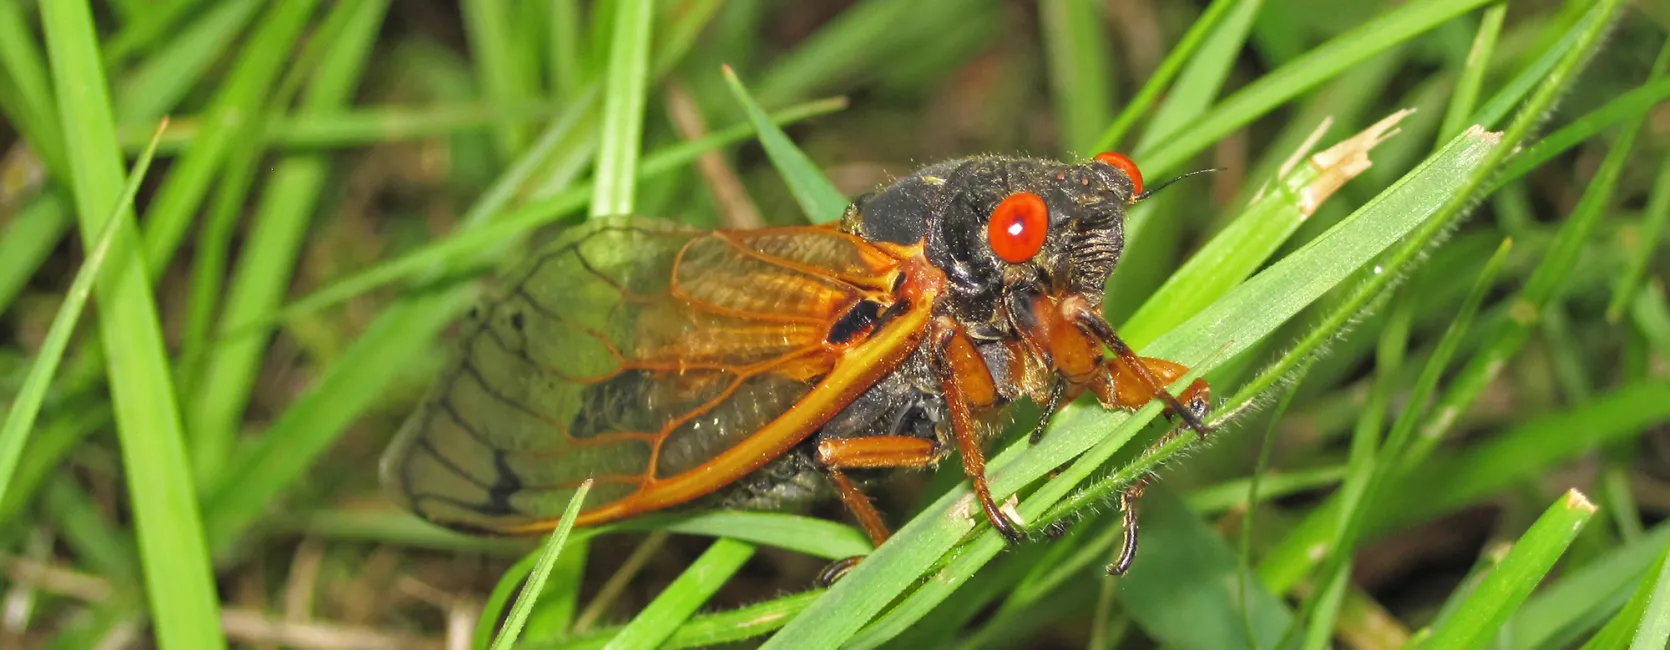 A cicada with orange wings, black body, and red eyes. It is sitting on a blade of grass.